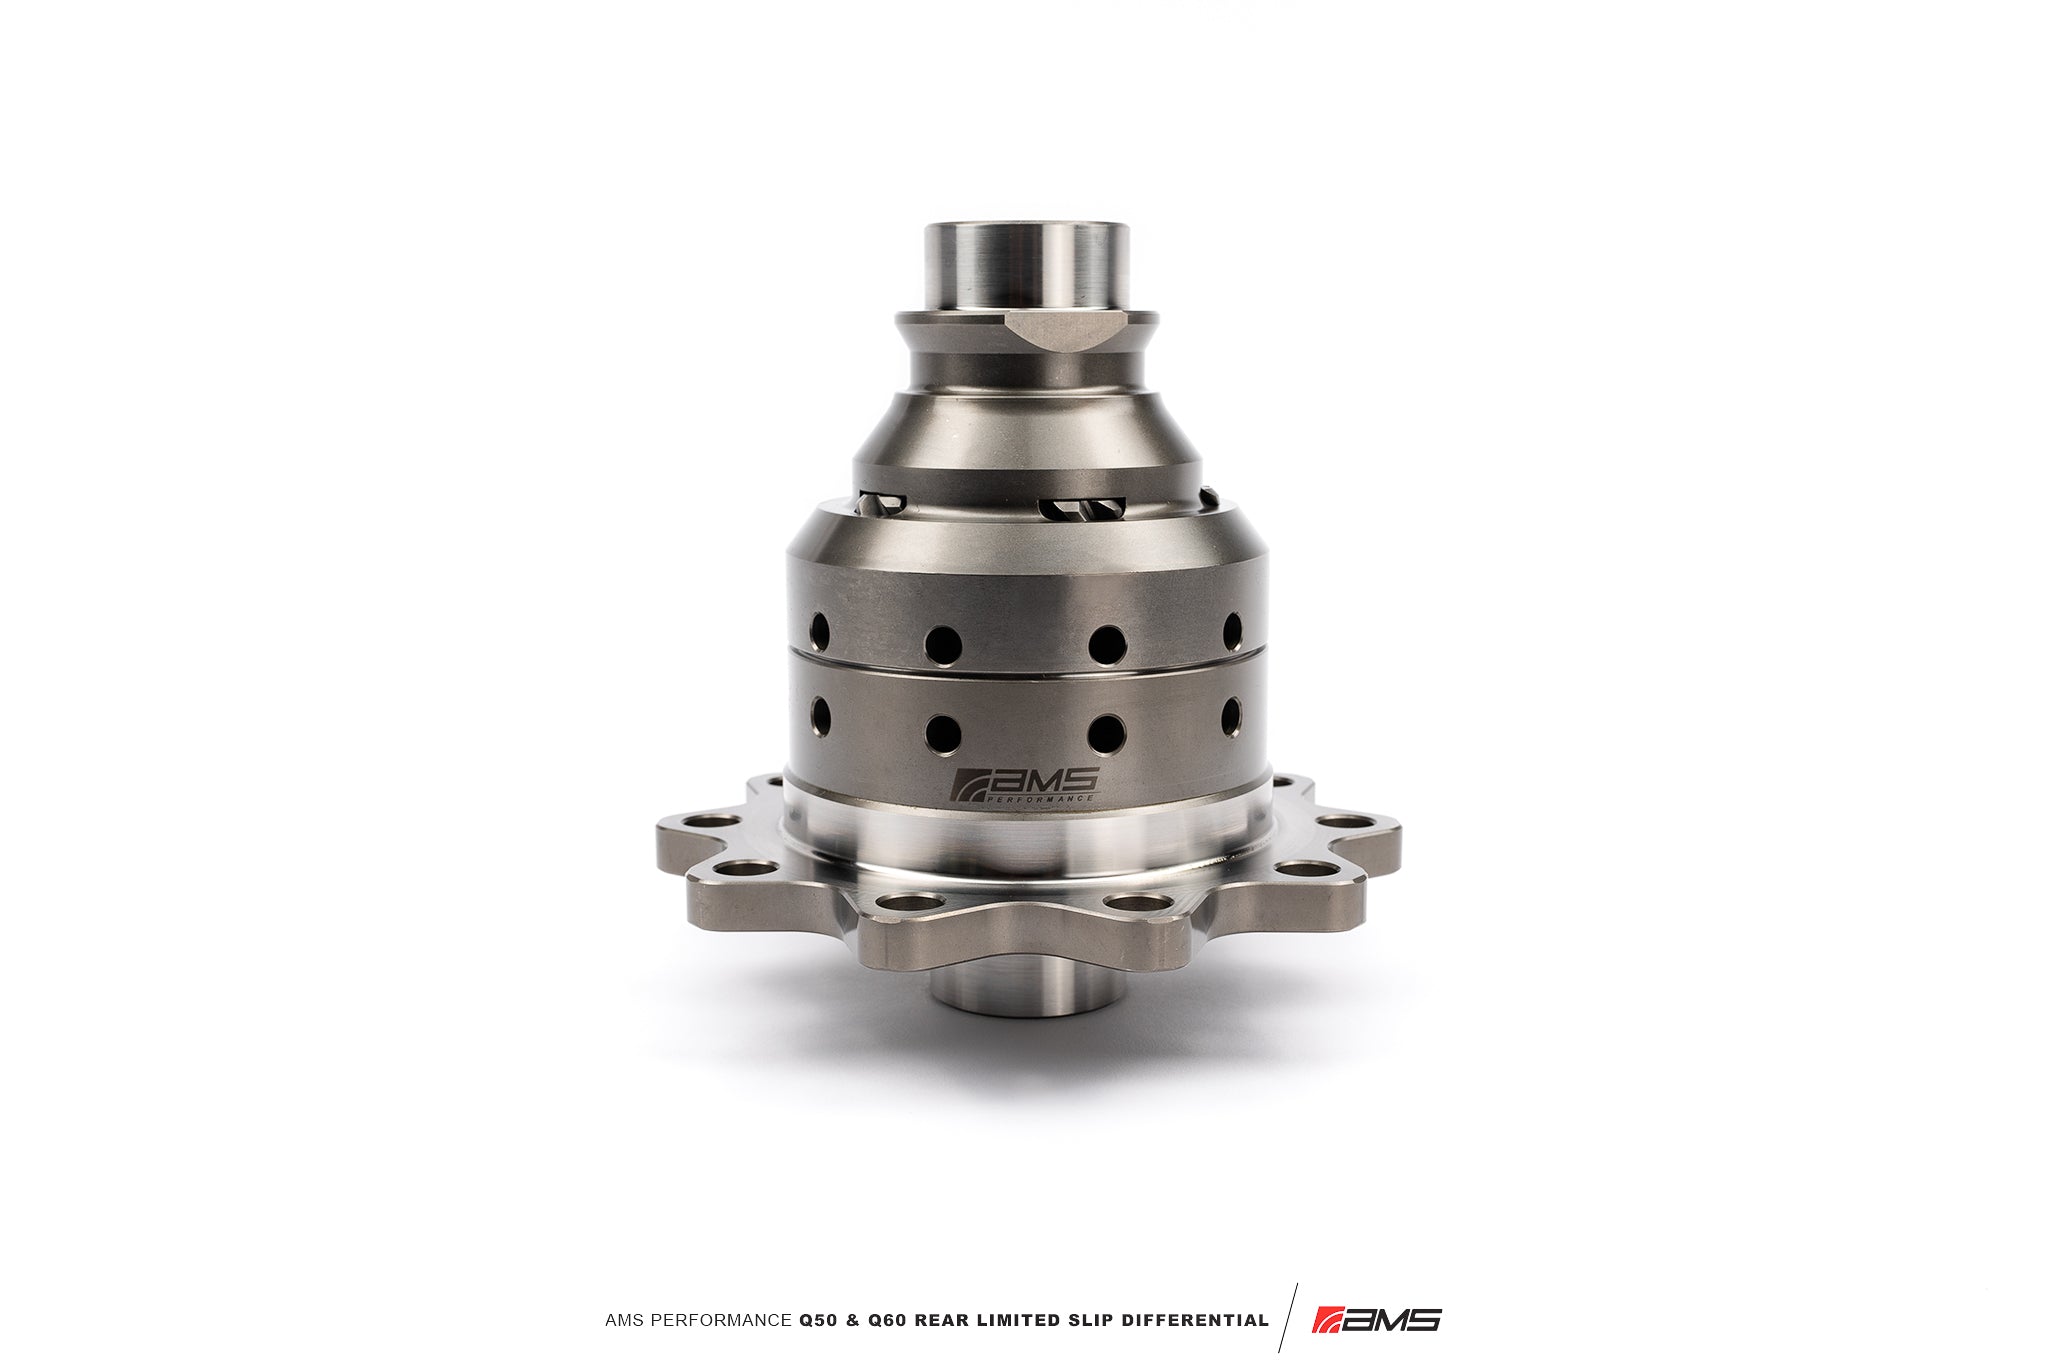 AMS PERFORMANCE Q50 & Q60 REAR LIMITED SLIP DIFFERENTIAL - 0